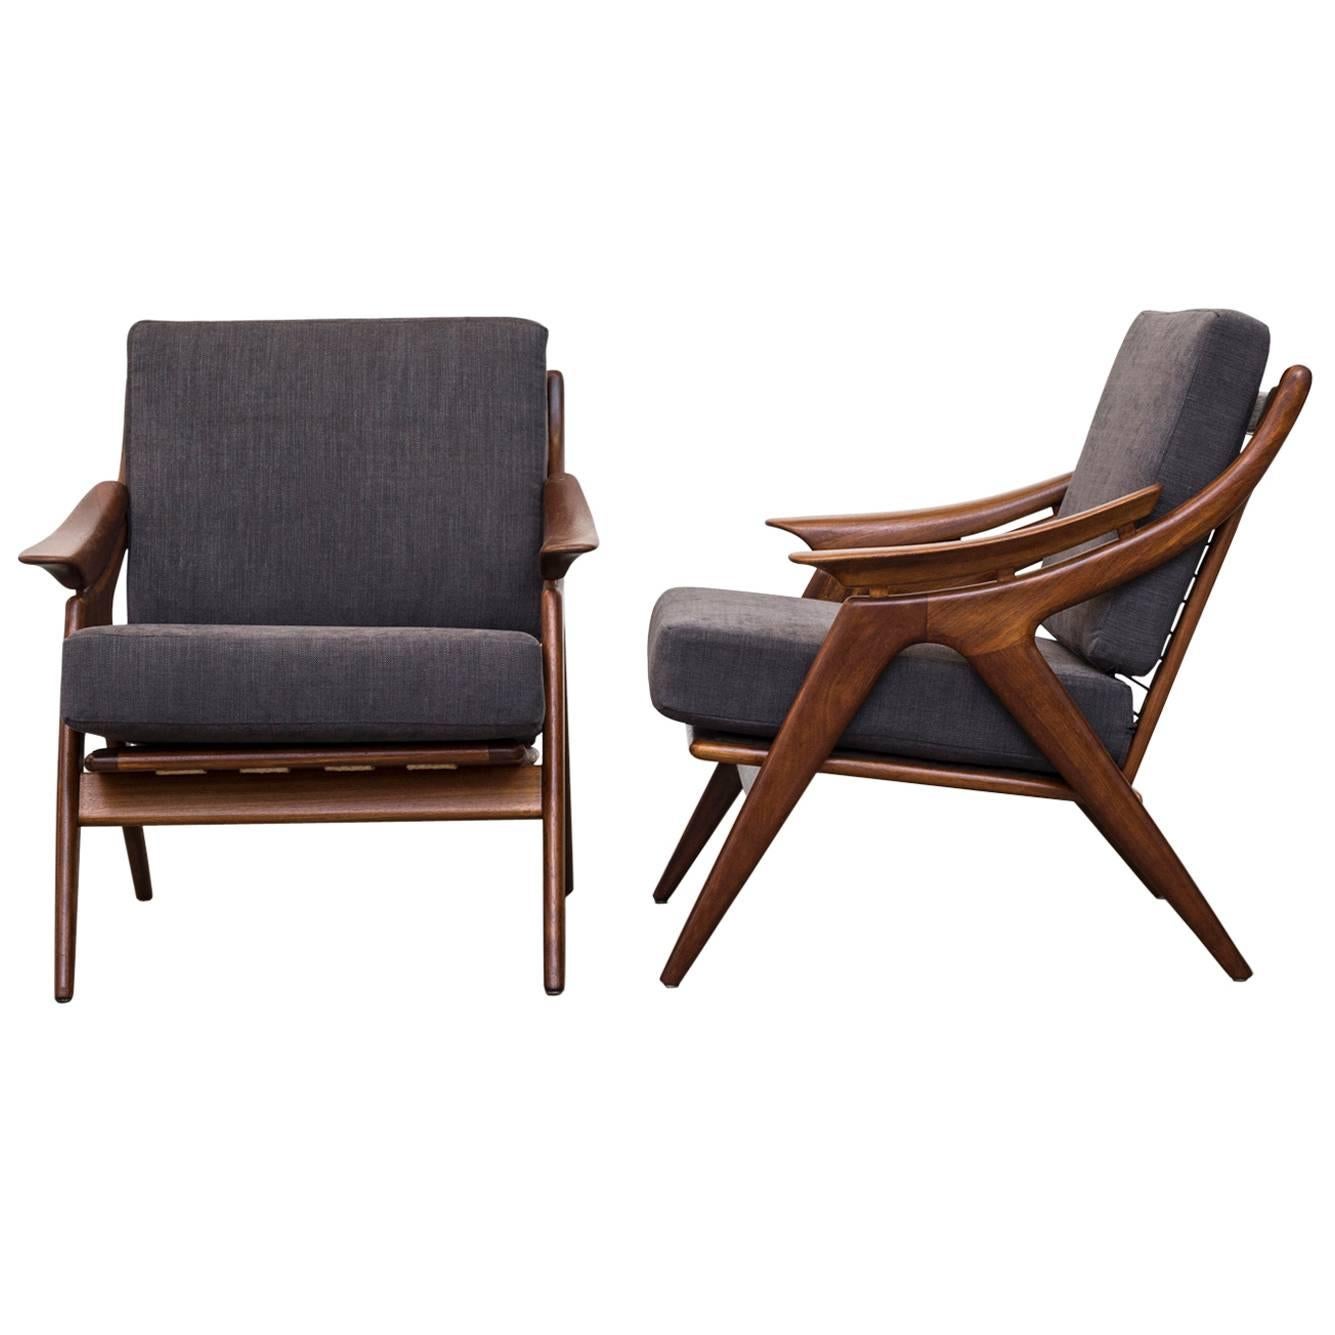 Pair of Mid-Century Organic Carved Teak Lounge Chair by De Ster